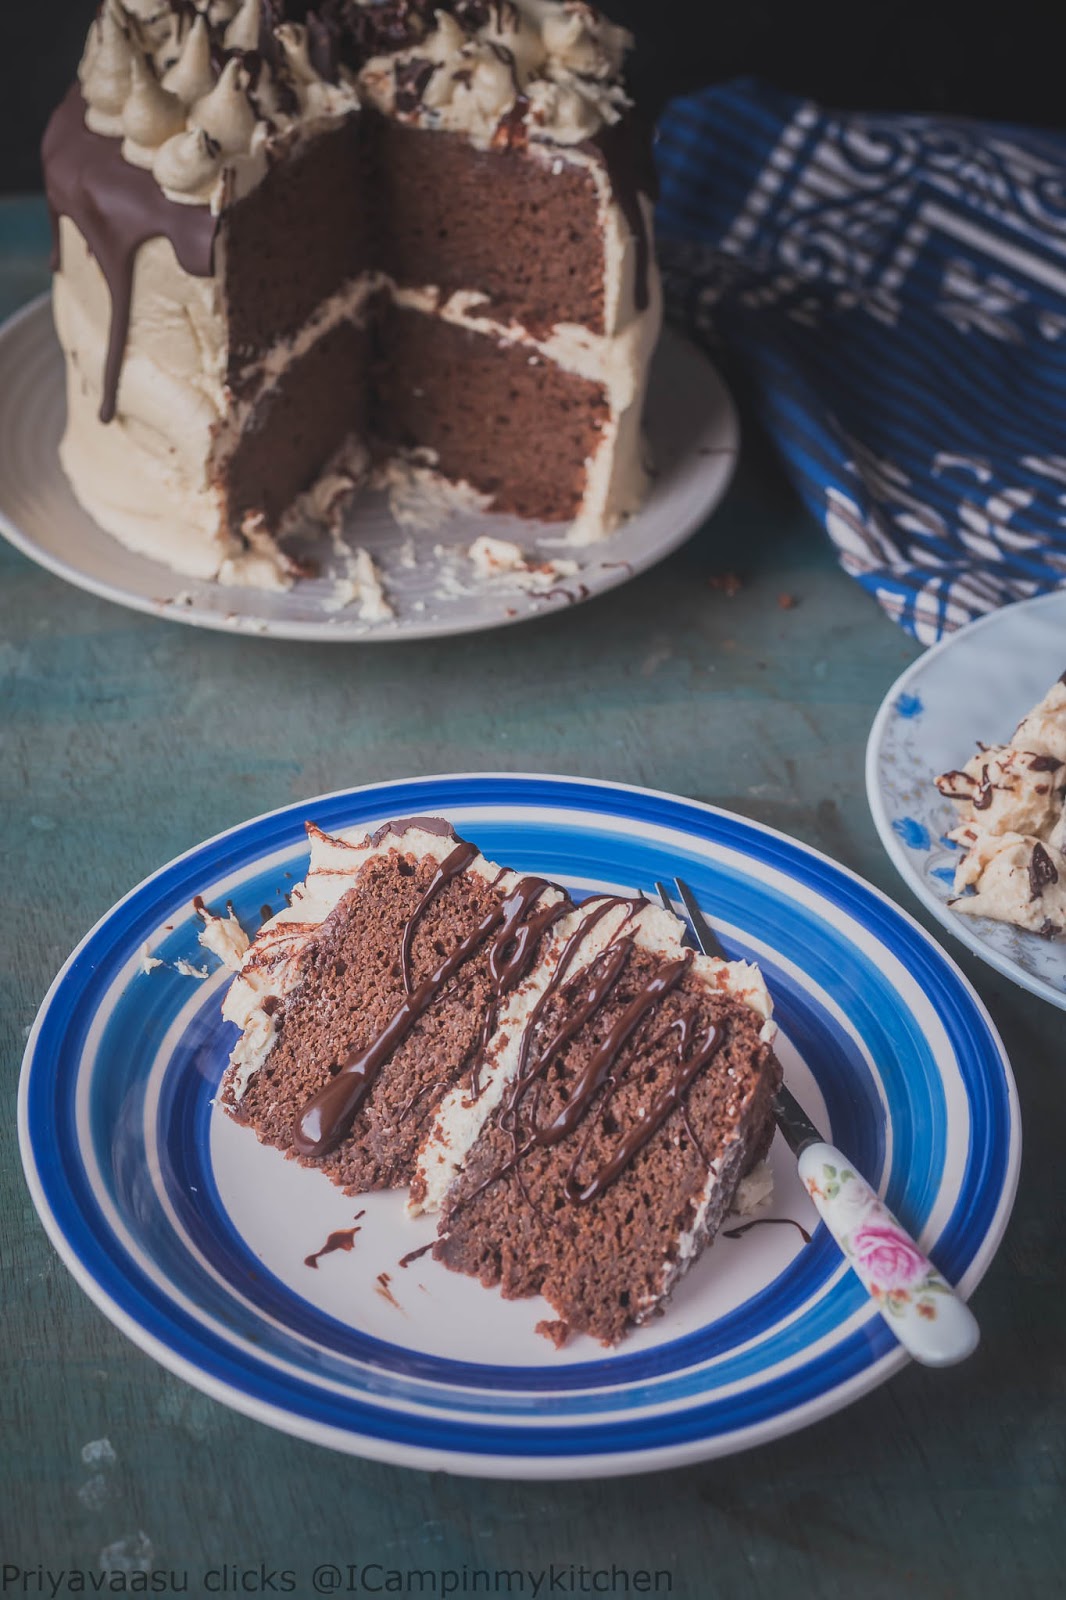 Soft and fluffy chocolate cake